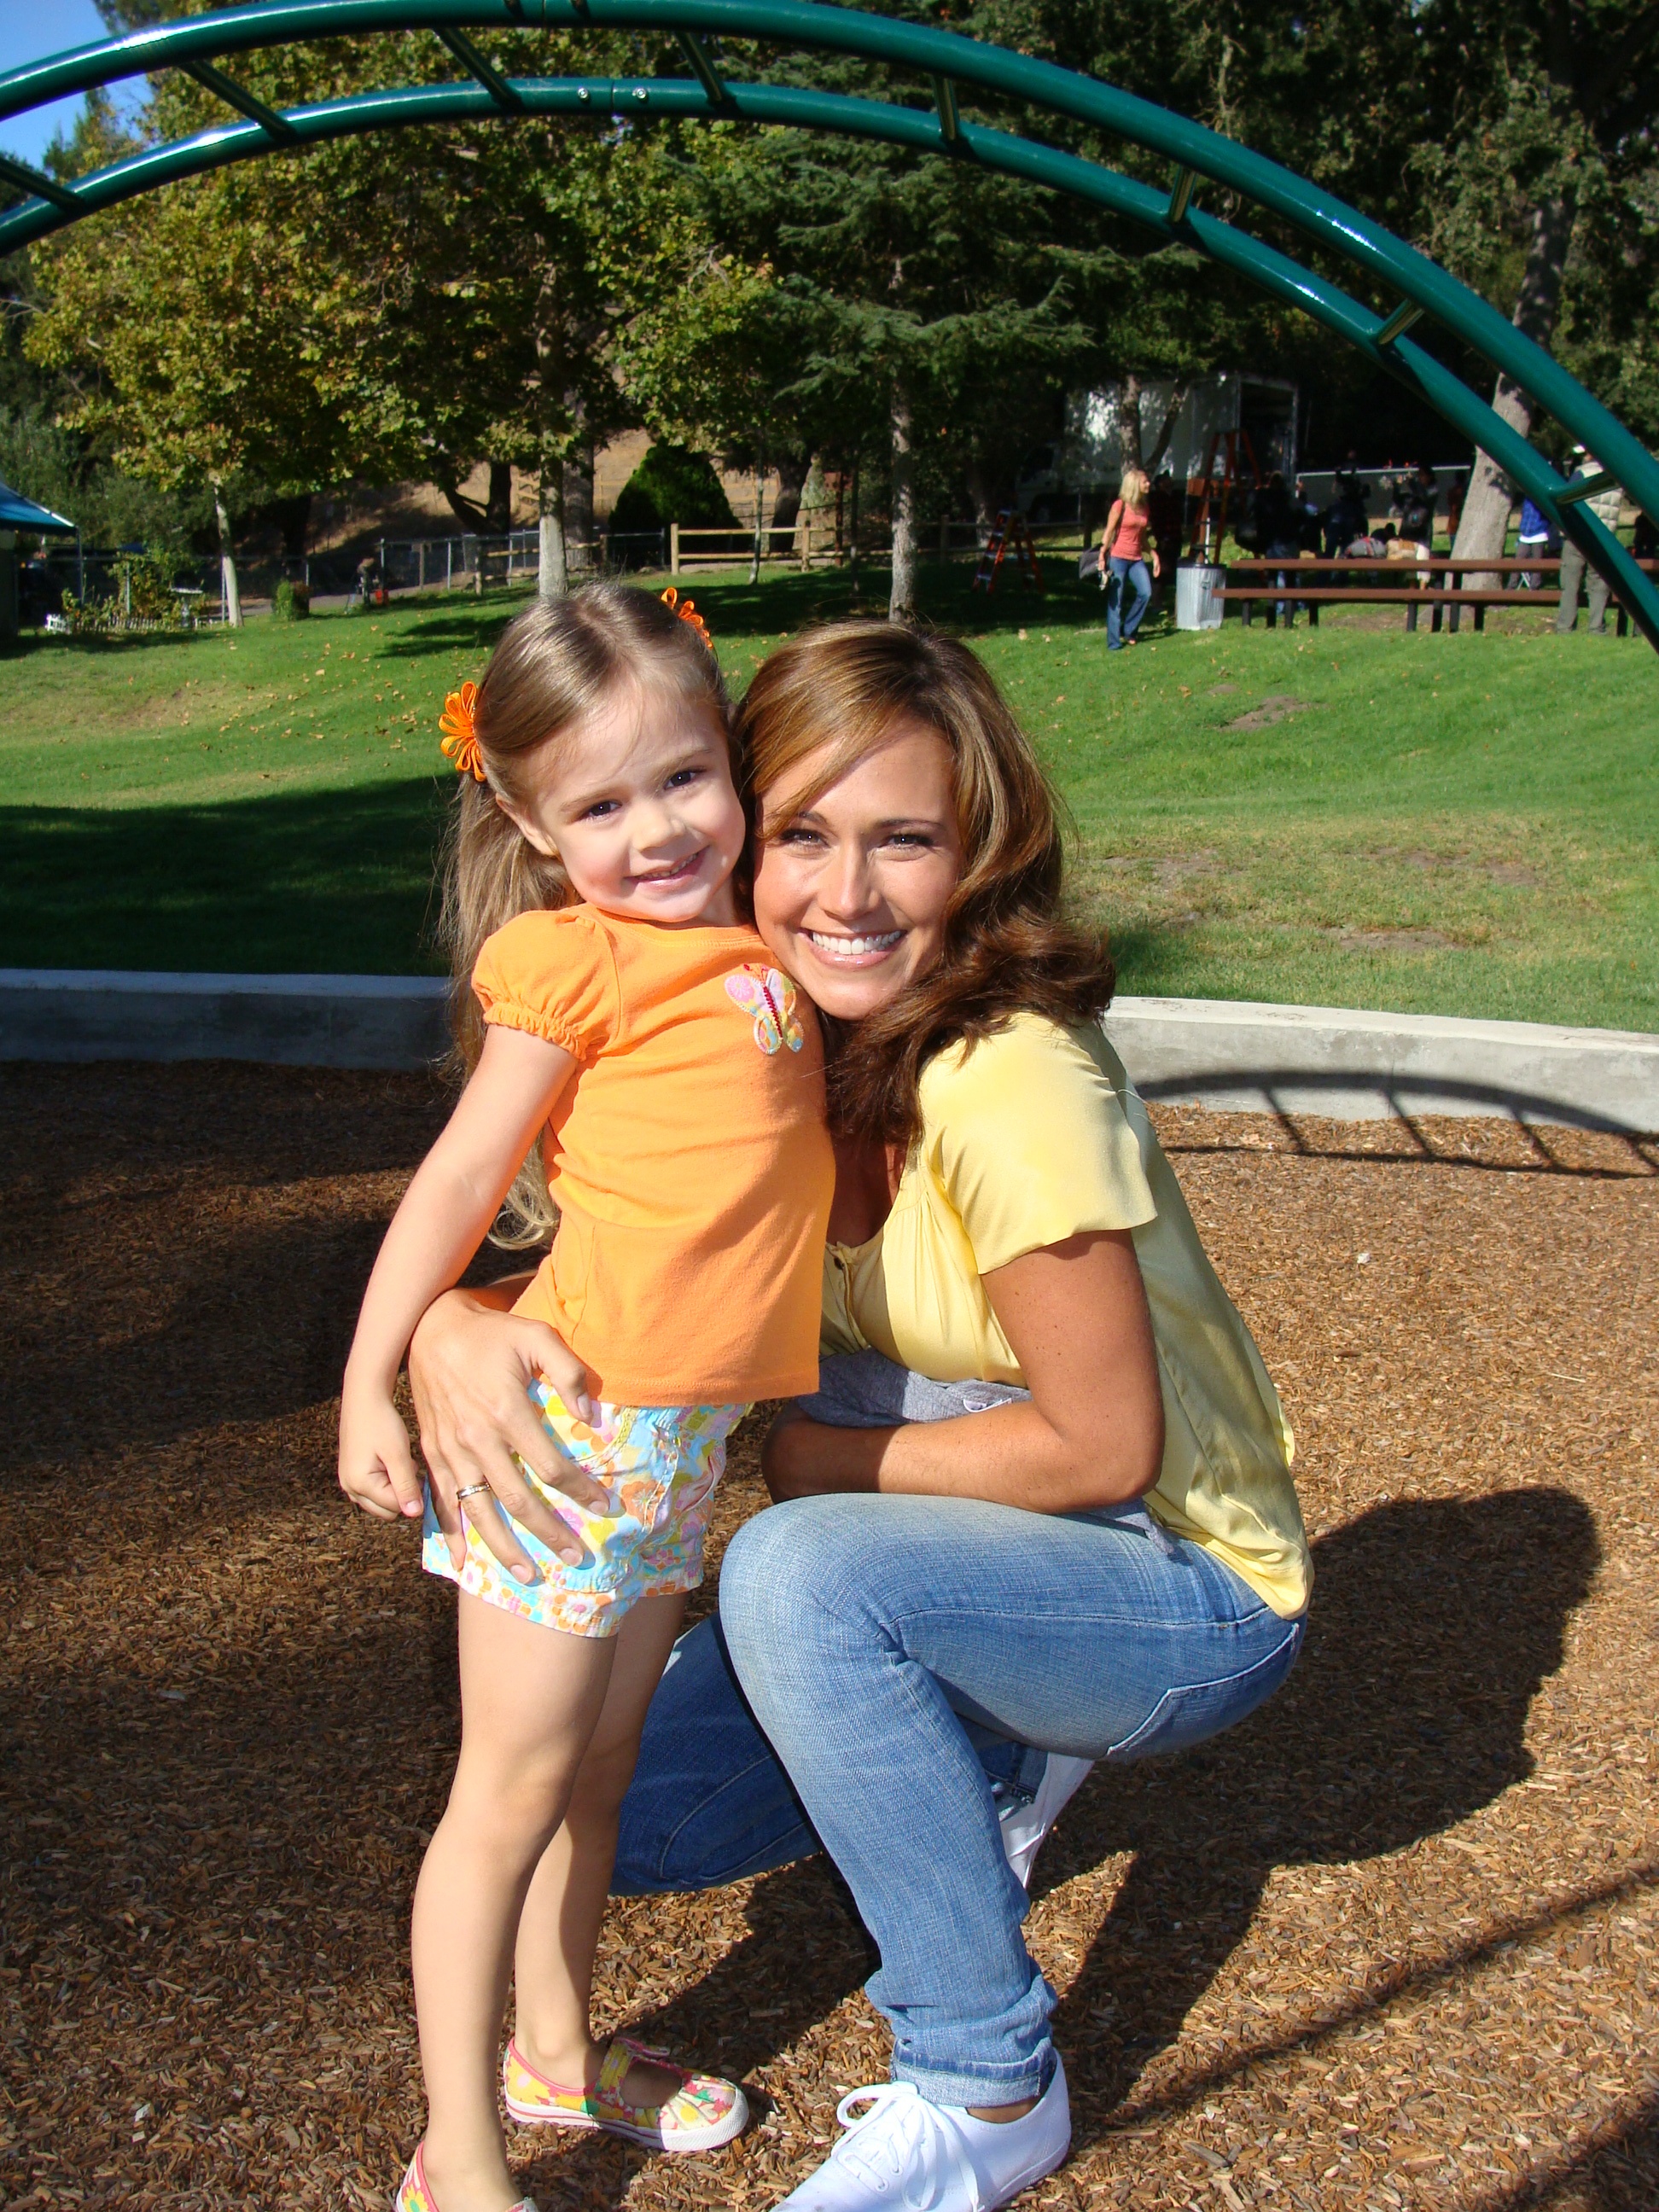 9/20/09: Alyssa with her movie Mom Nikki Deloach on set of Flying Lessons.